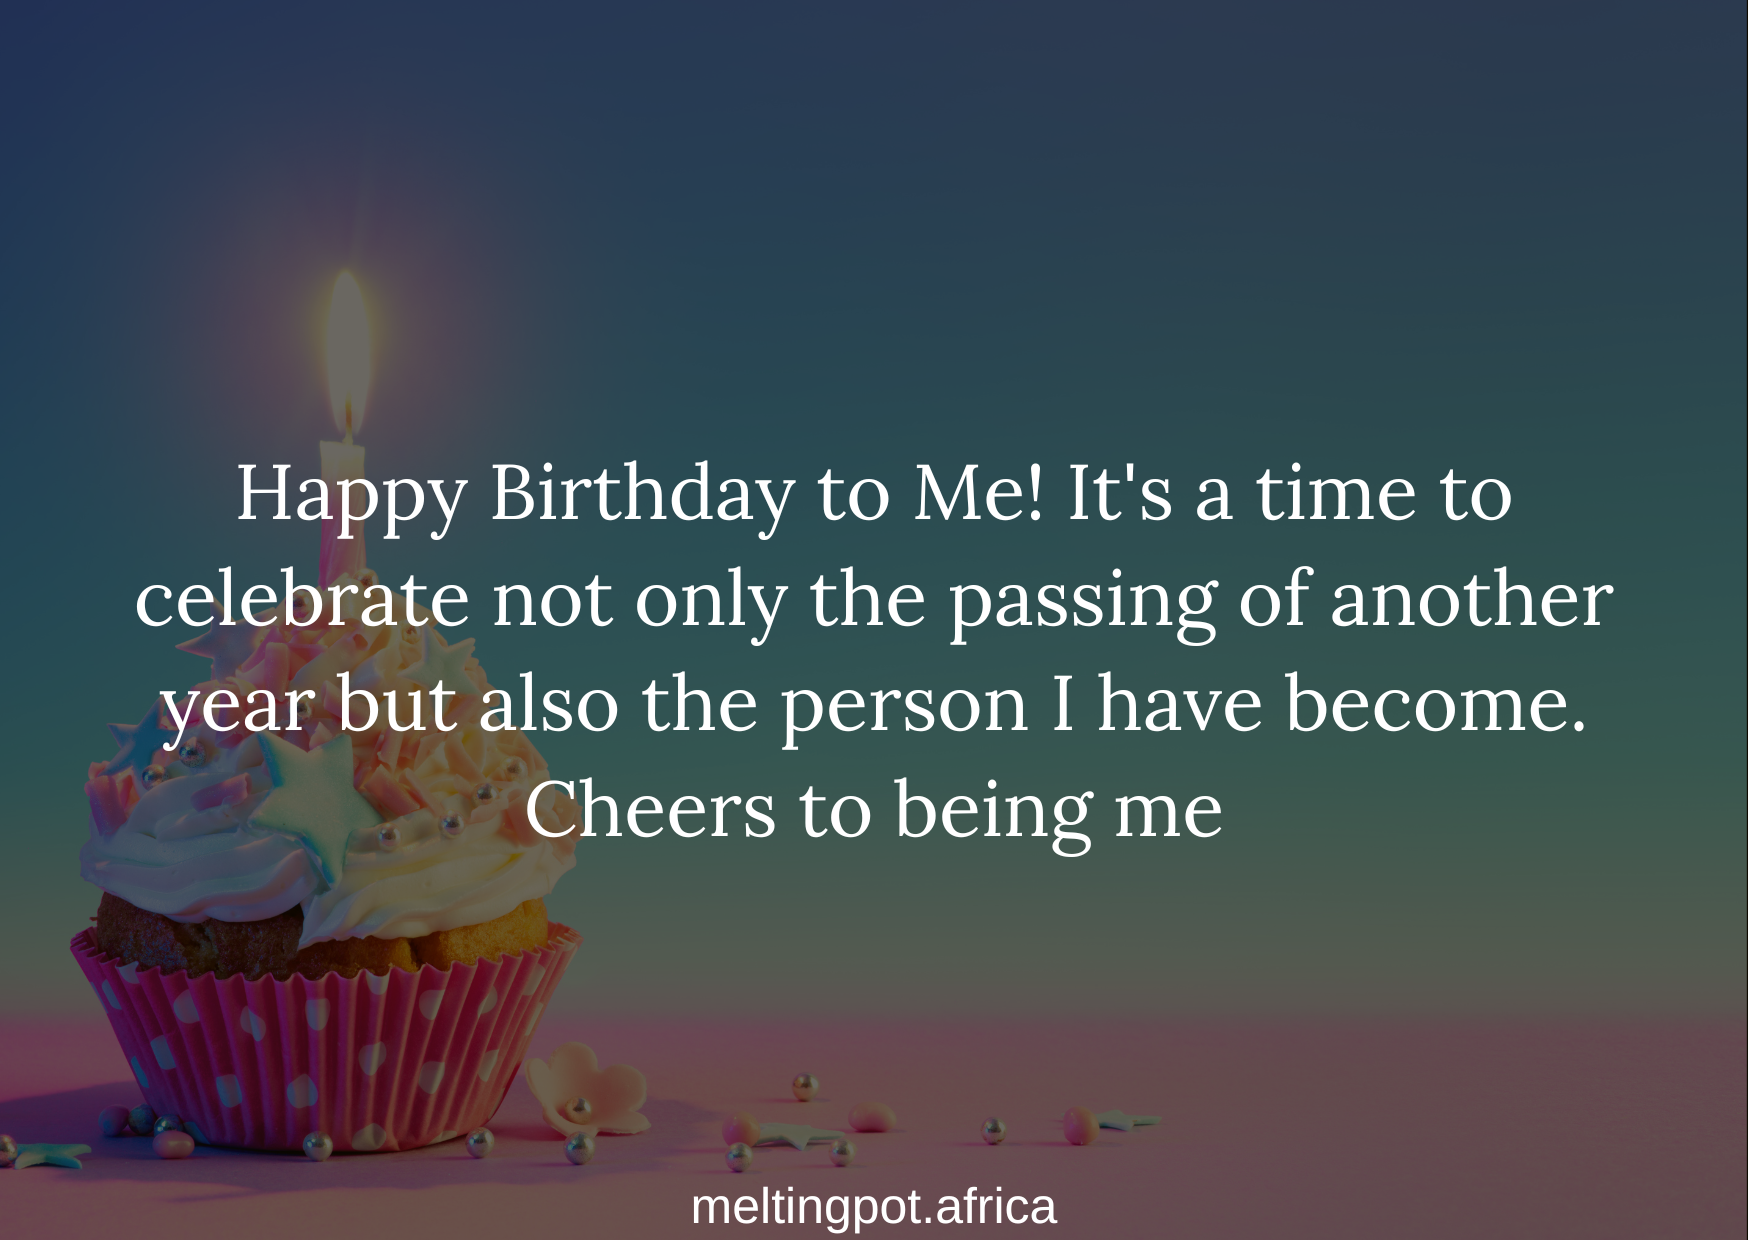 150 Birthday Wishes For Myself - Inspirational Quotes, Wishes ...